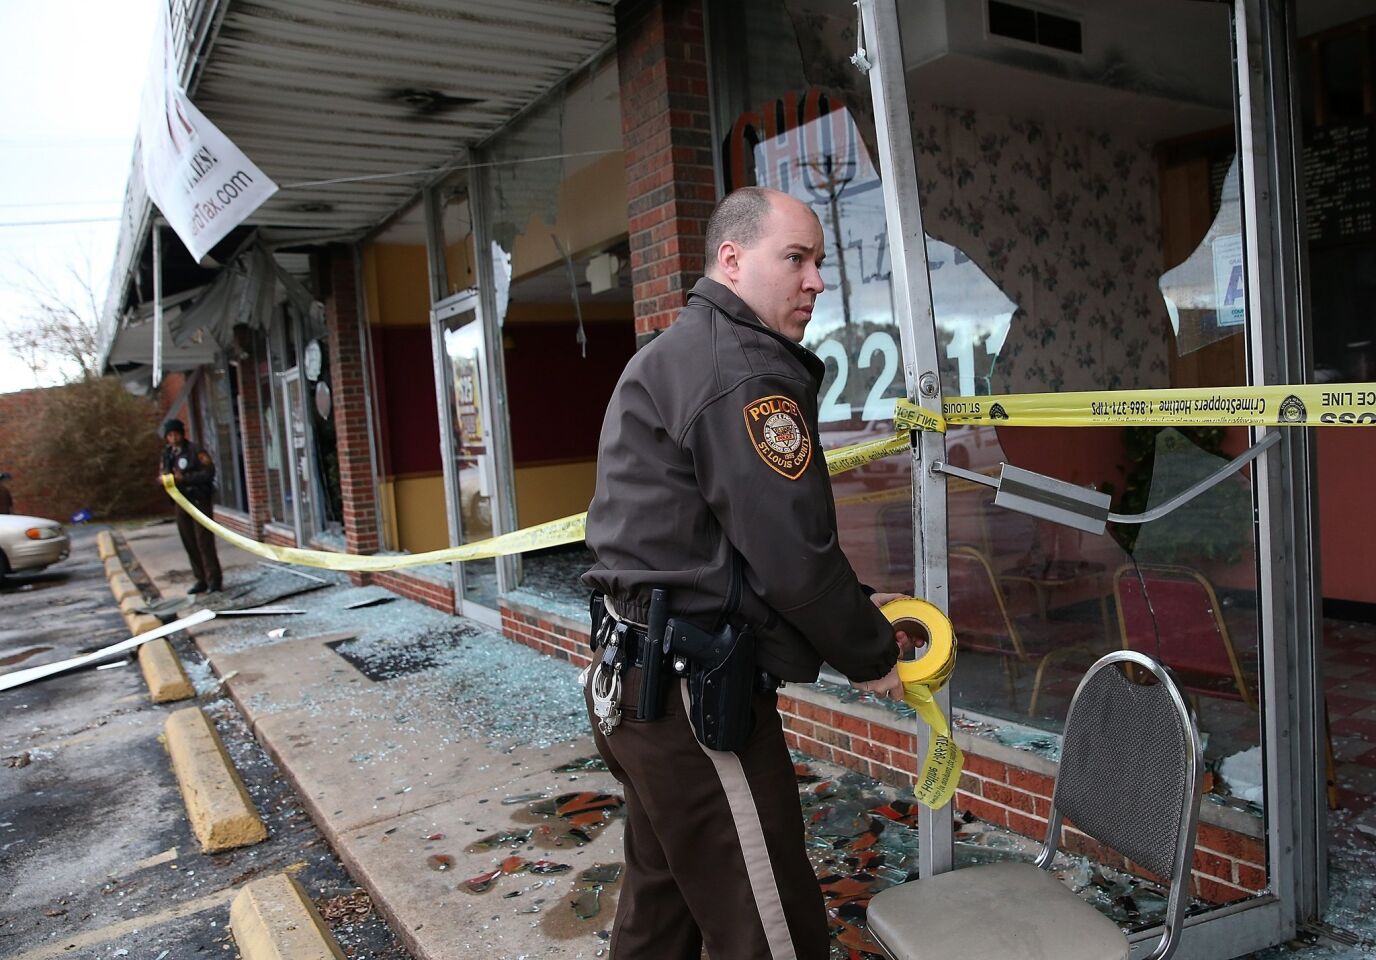 A St. Louis county police officer applies police tape Tuesday to a building that burned during a demonstration in Dellwood, Mo.